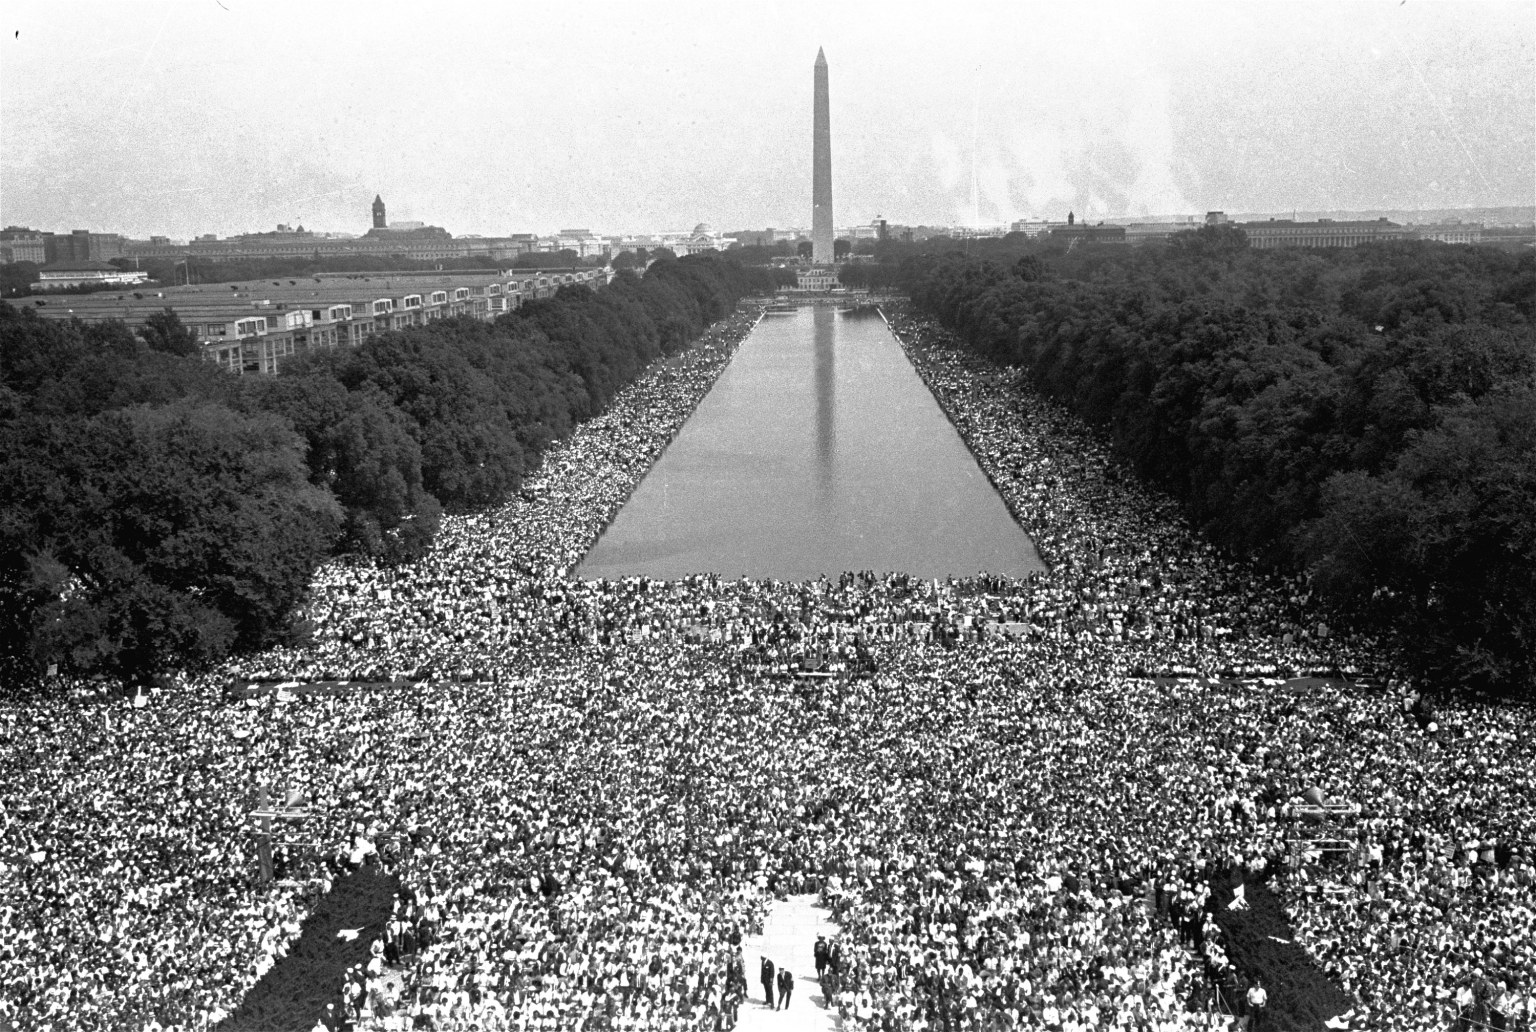 Photo from the March on Washington in 1963